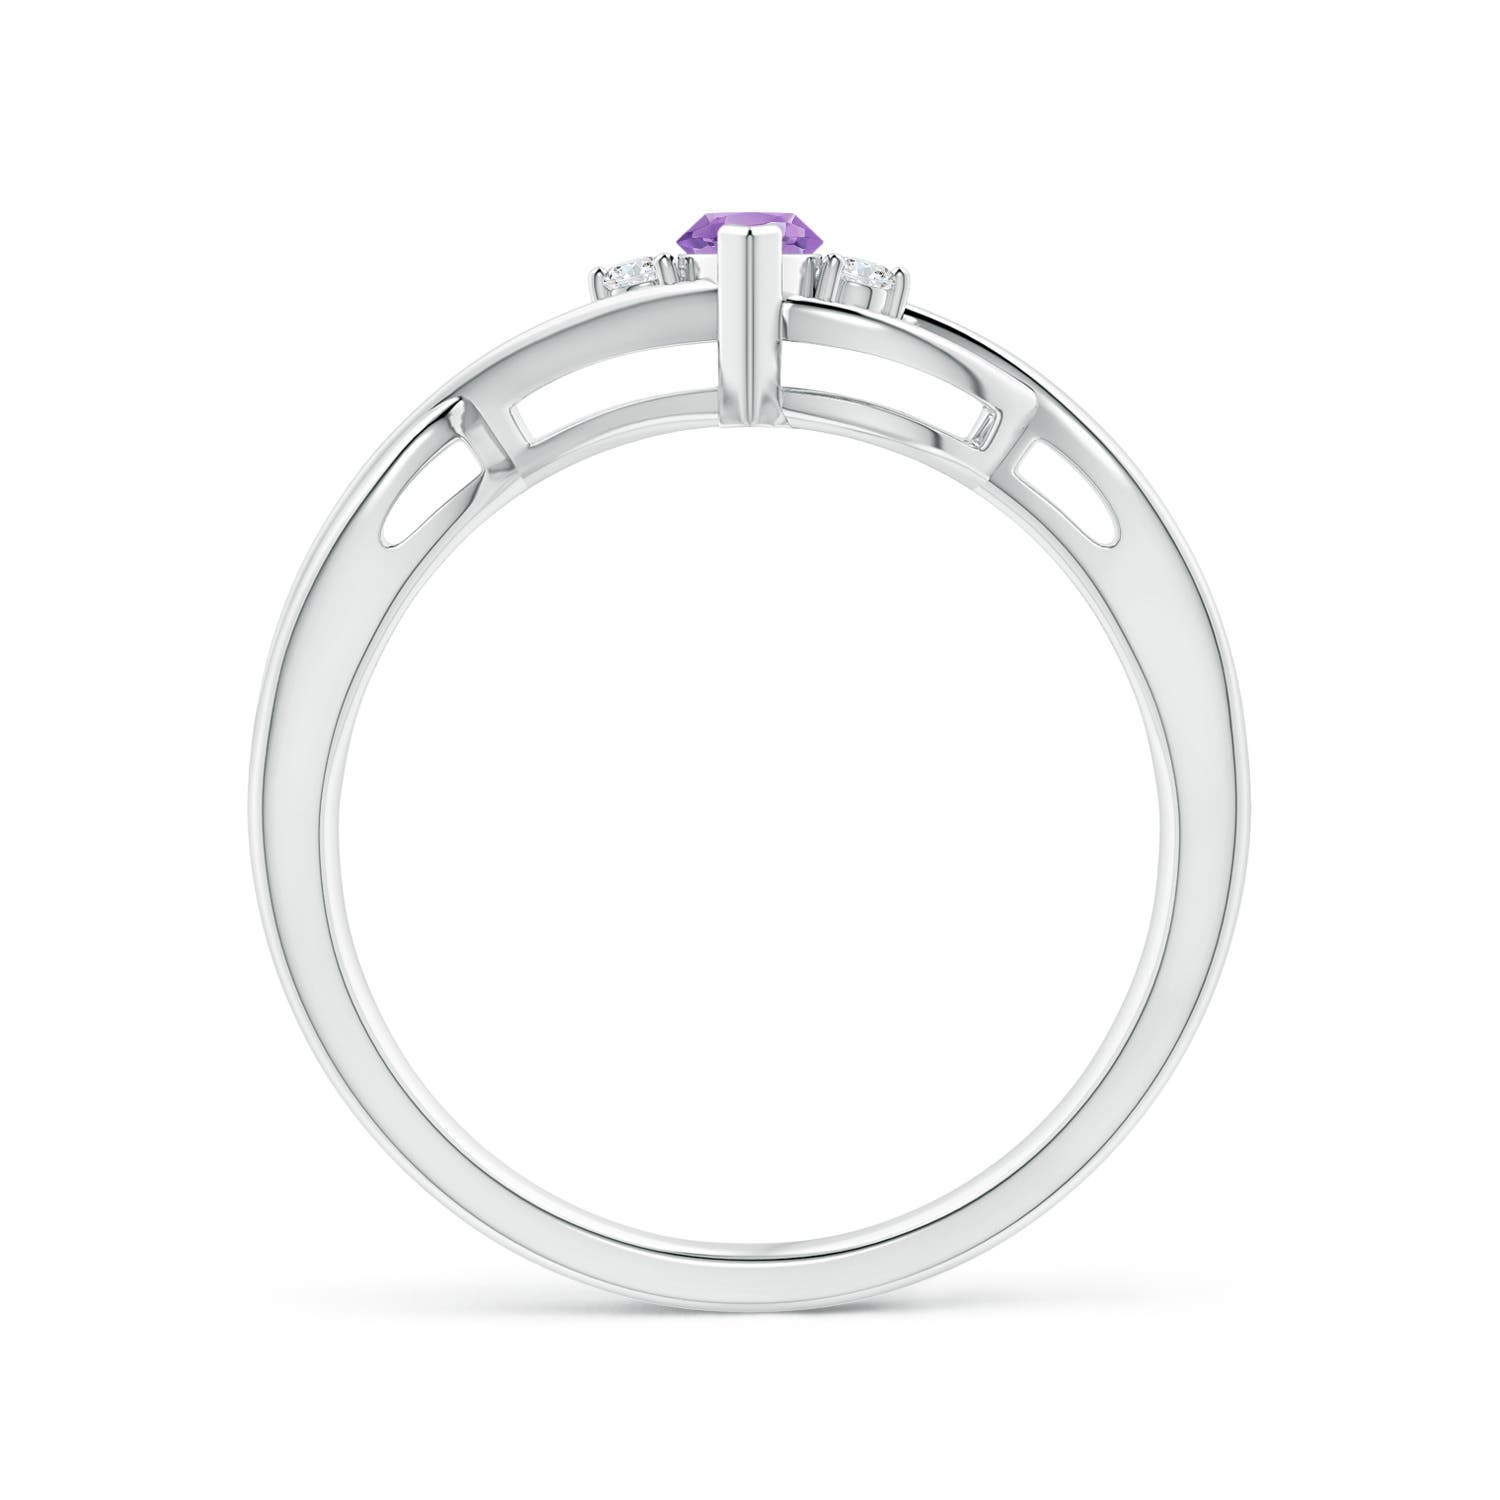 A - Amethyst / 0.23 CT / 14 KT White Gold